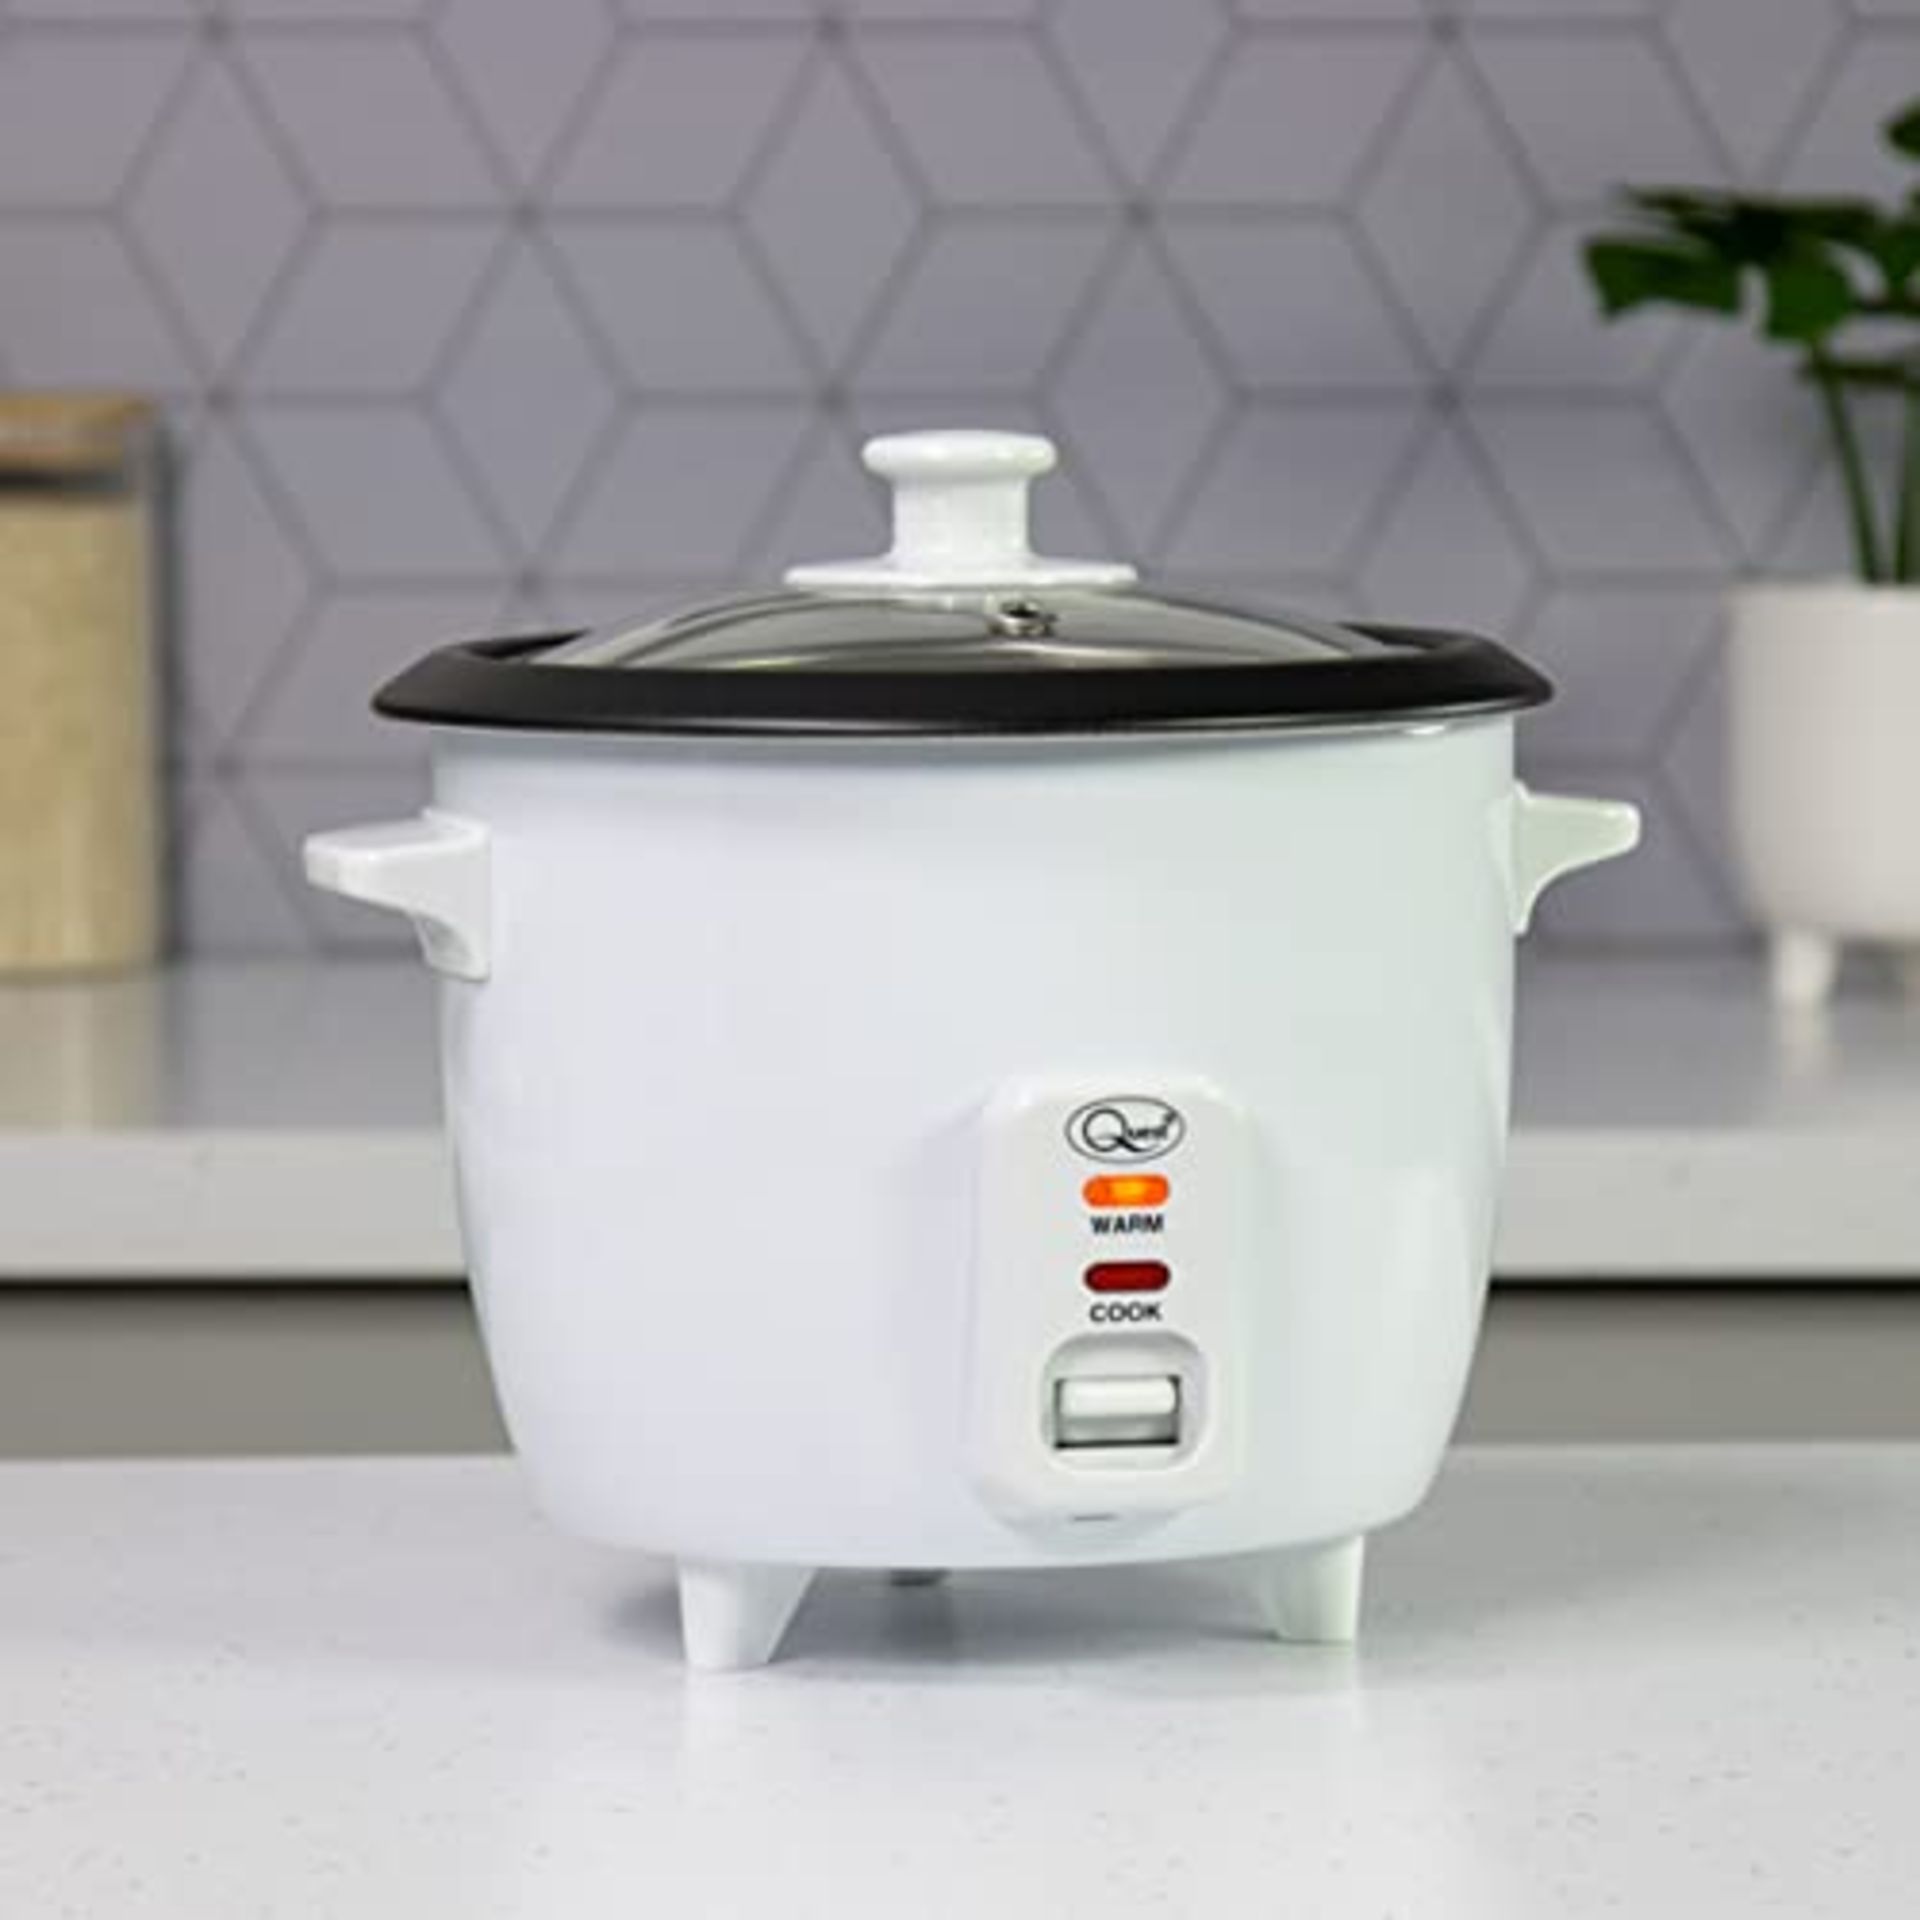 Quest 35530 0.8L Rice Cooker / Non-Stick Removable Bowl / Keep Warm Functionality / 35